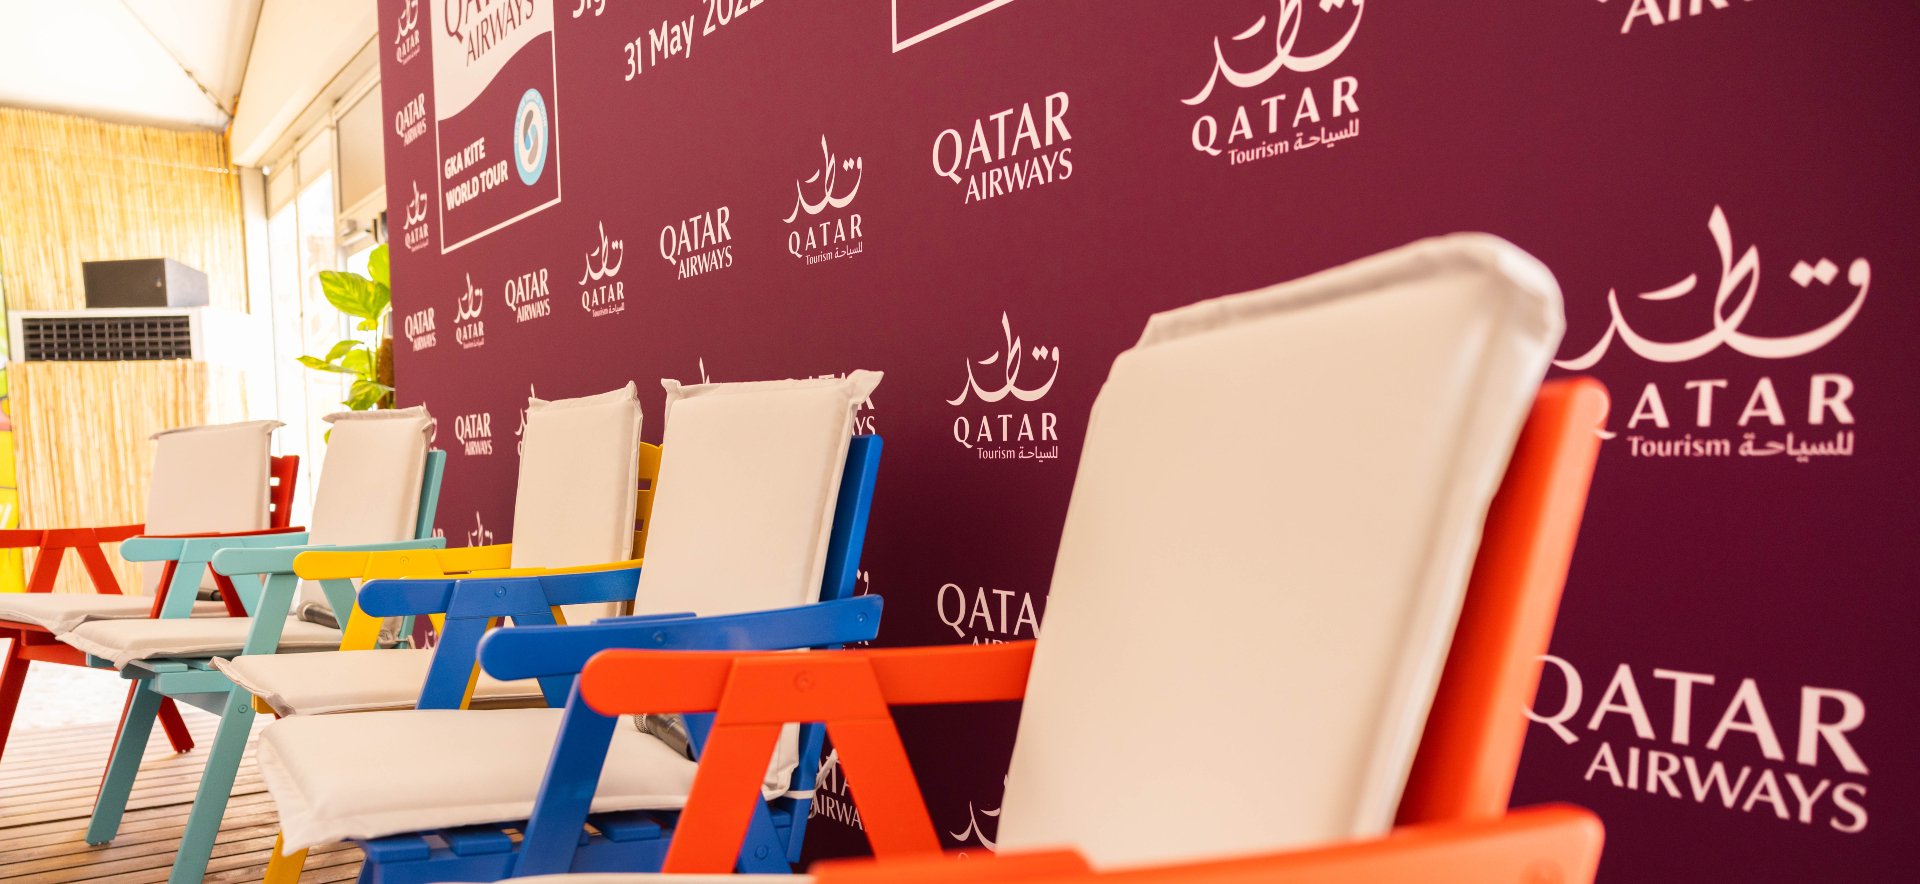 Travel PR News Qatar Airways the Title Partner and Official